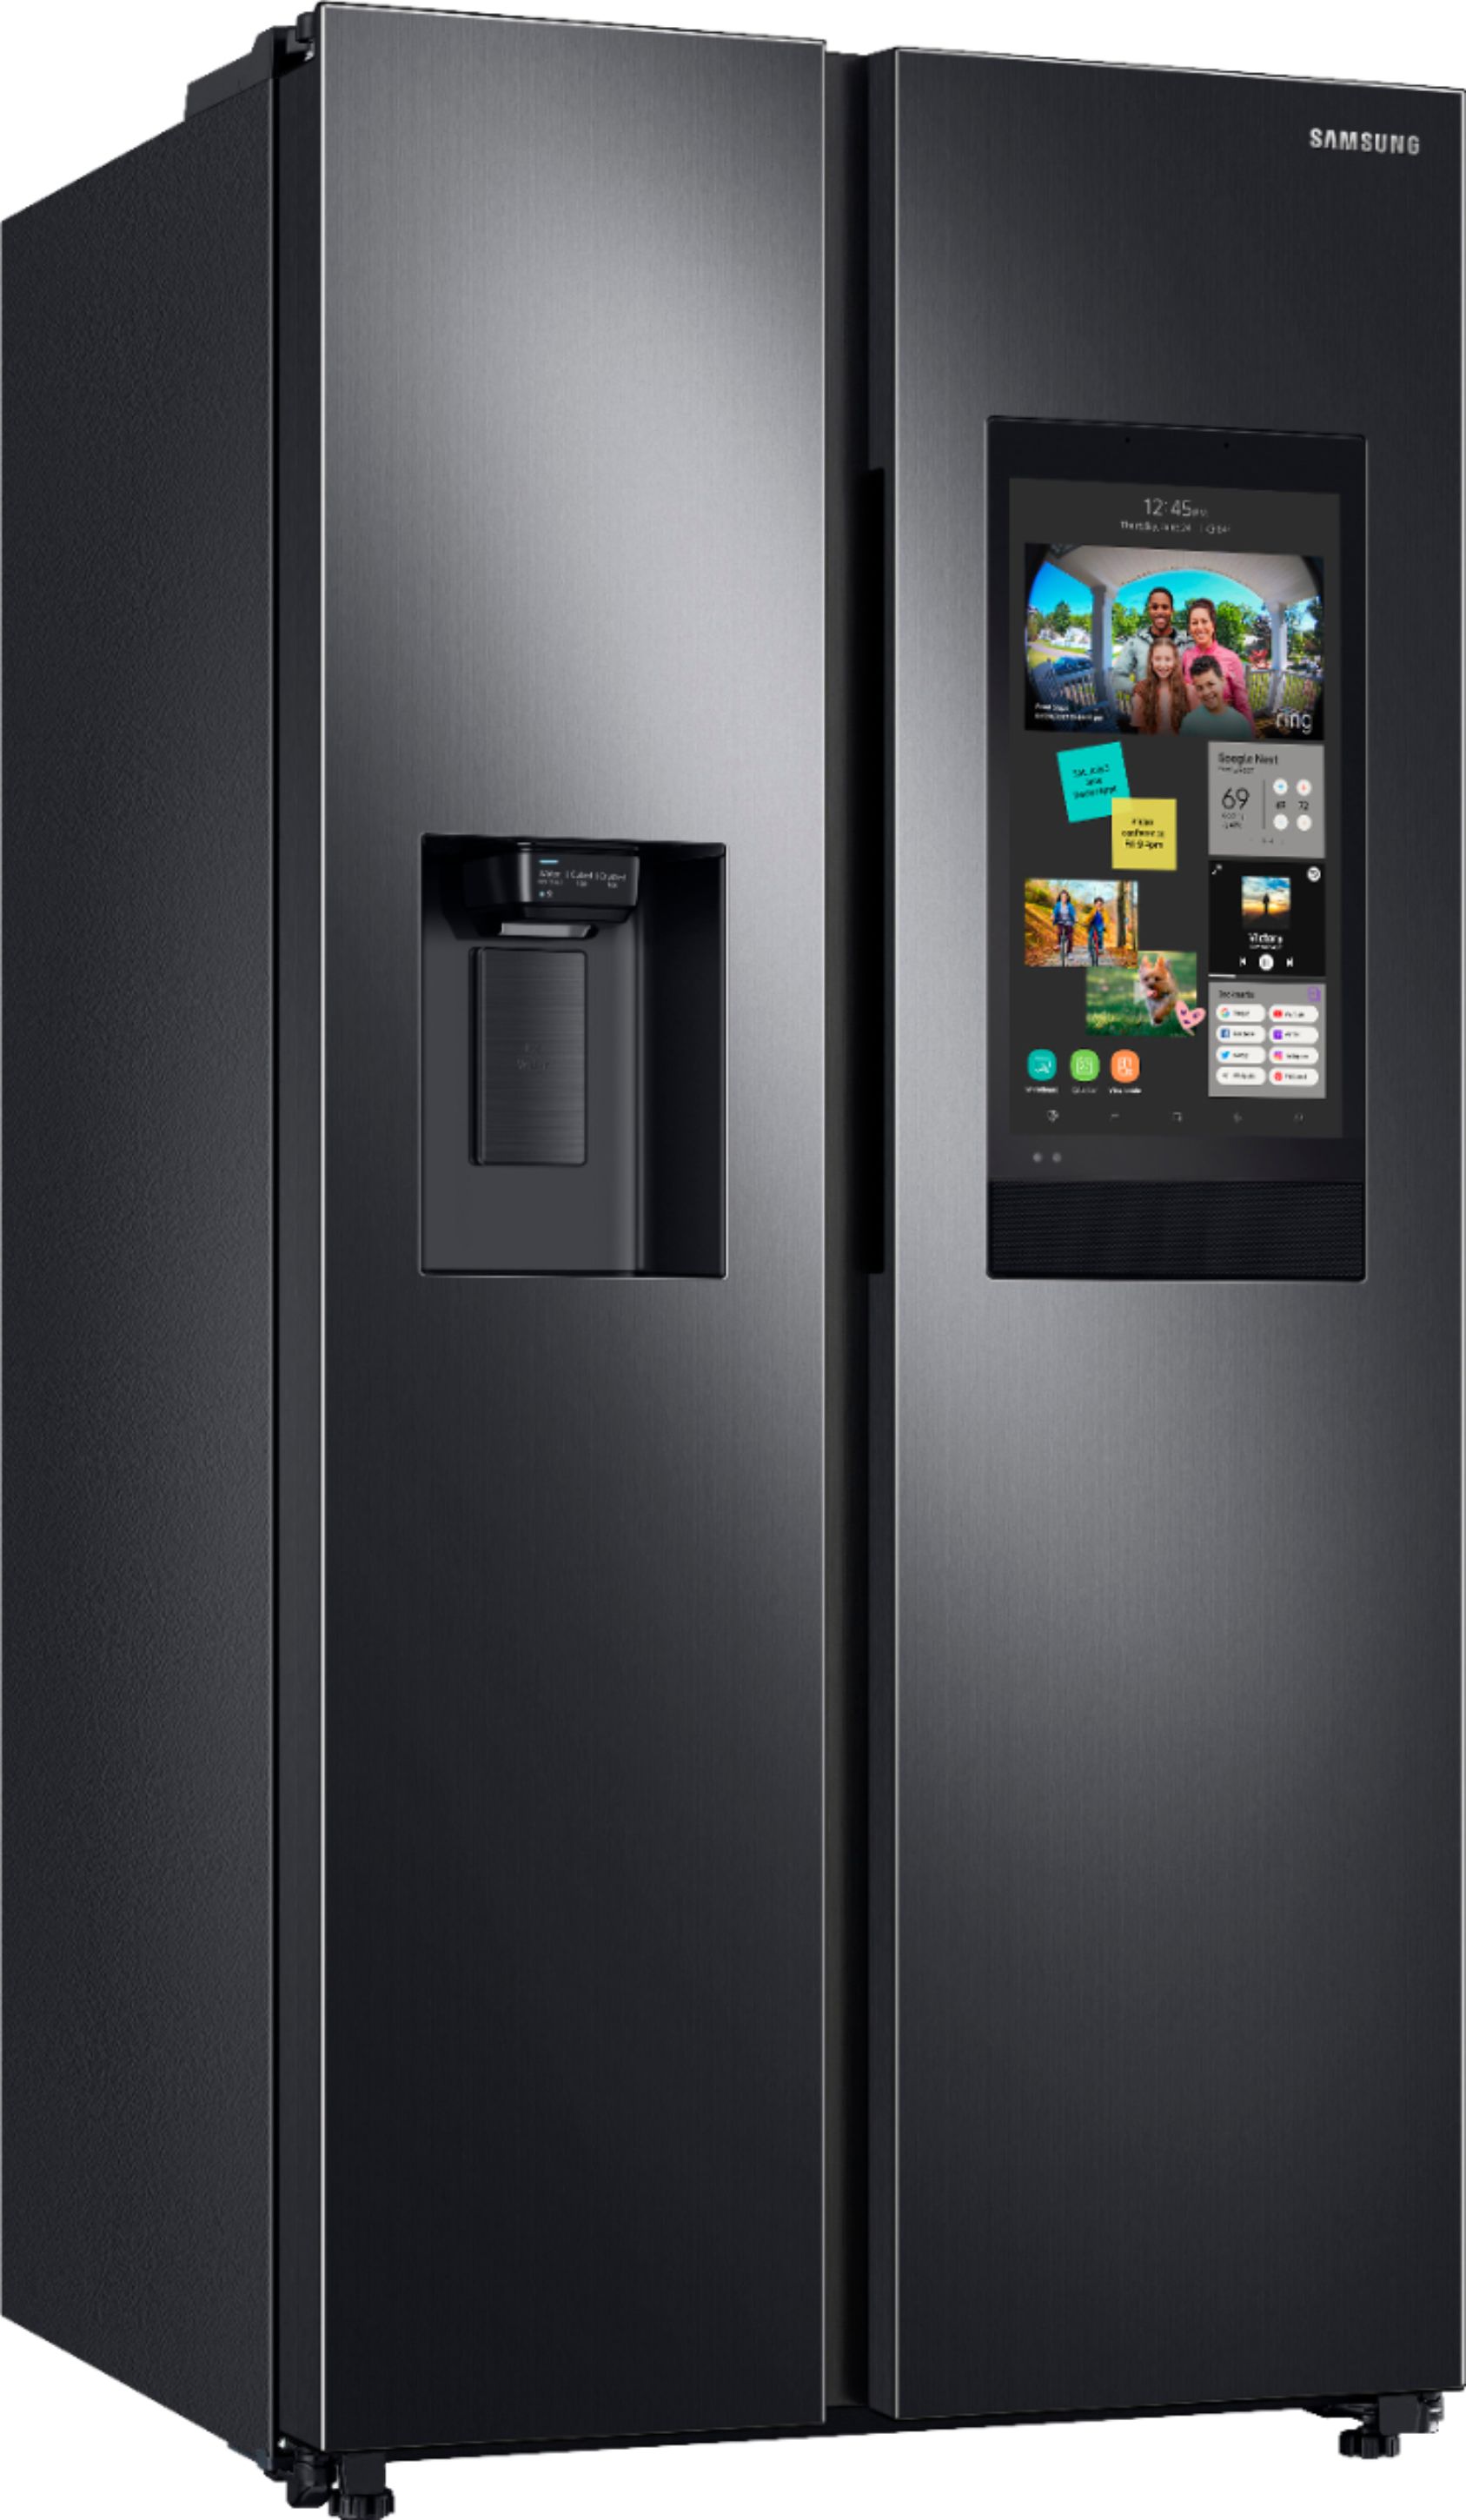 Questions and Answers: Samsung 26.7 cu. ft. Side-by-Side Smart ...